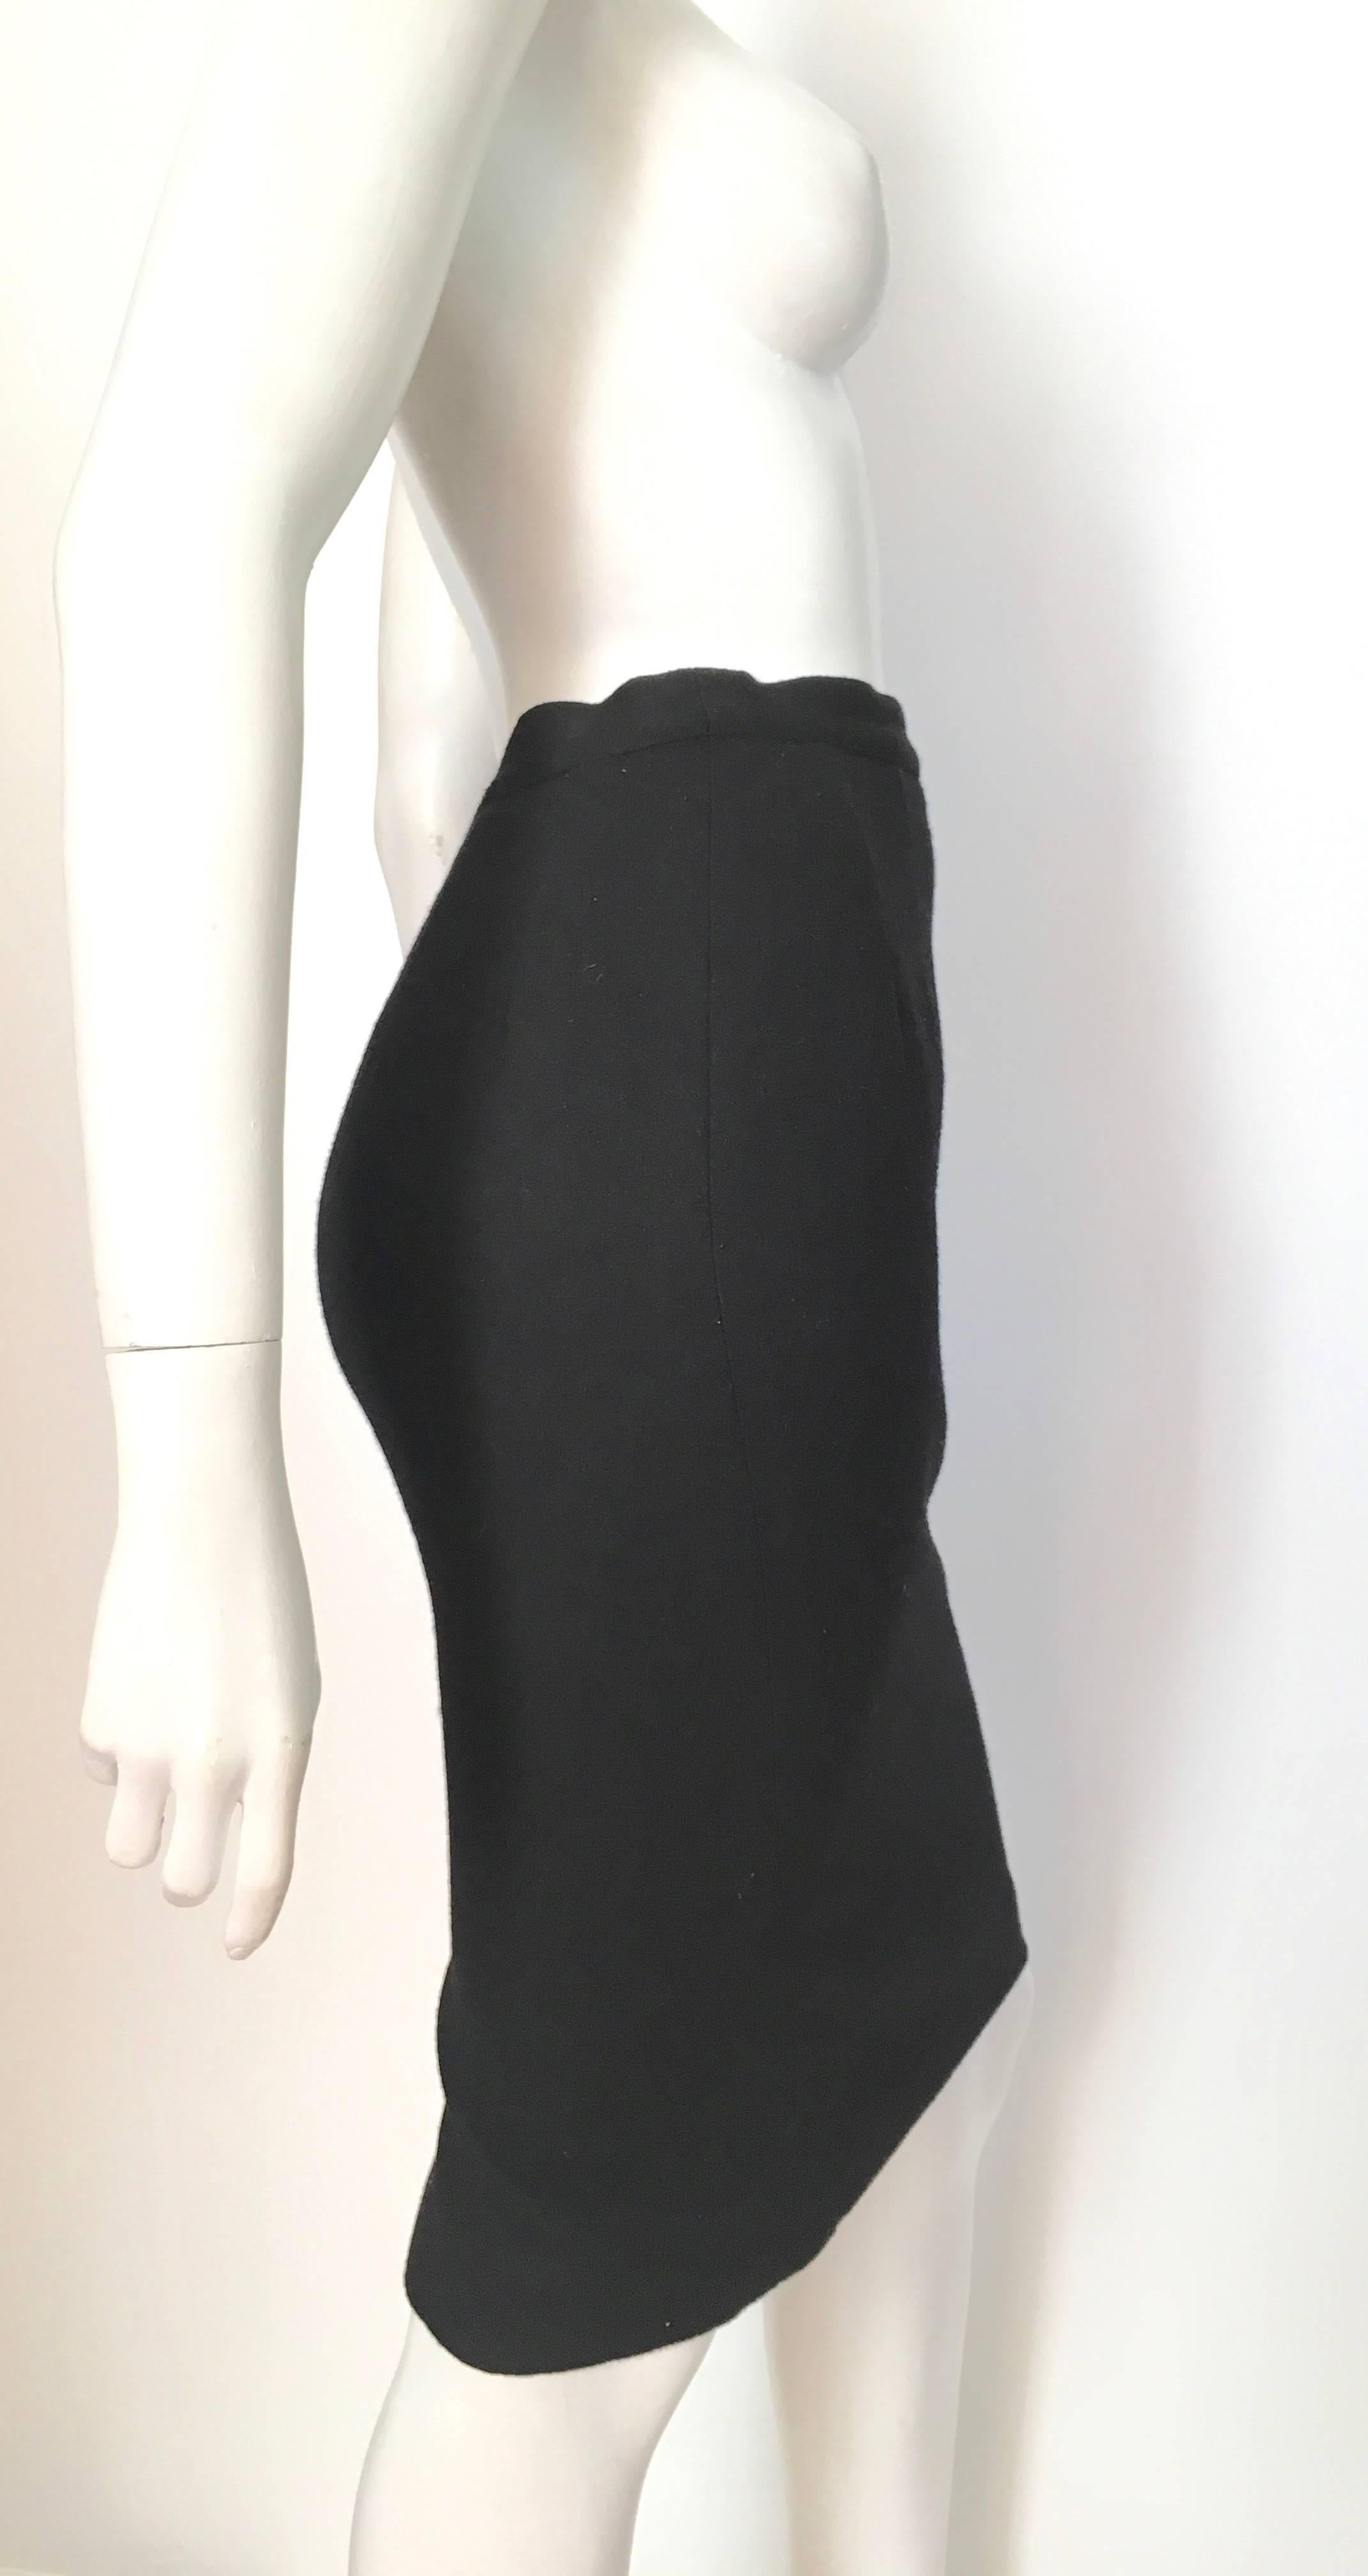 Guy Laroche black wool pencil skirt is a size 4. Ladies please grab your handy tape measure so you can measure your waist, hips & length to make sure this treasure will fit your lovely body.  Classic & timeless design and exquisite craftsmanship